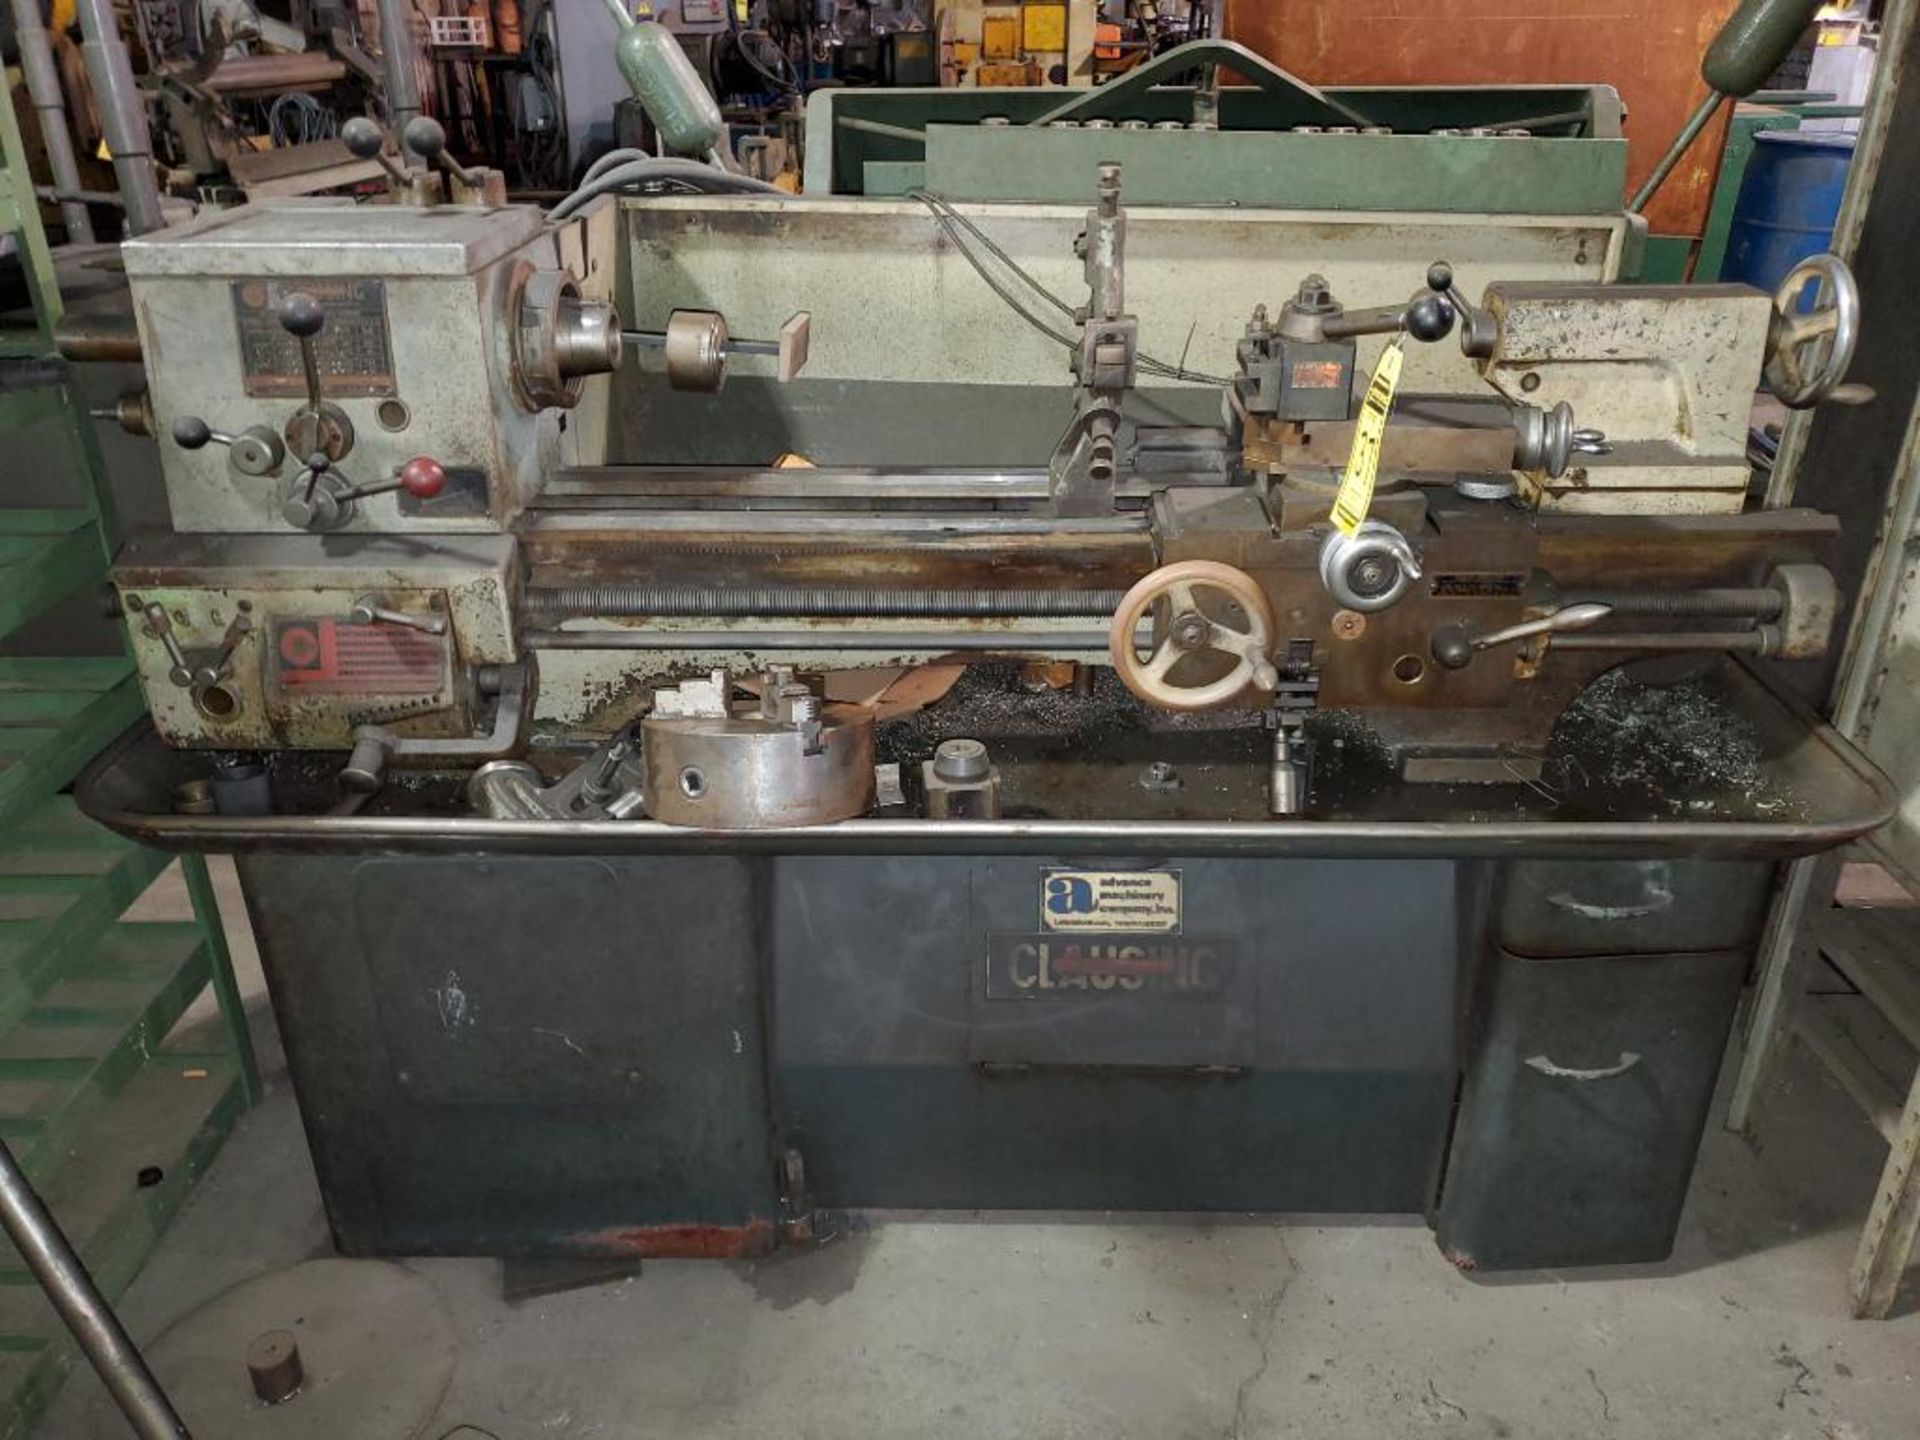 CLAUSING/COLCHESTER HORIZONTAL ENGINE LATHE, 48" BED, SPINDLE CHUCK W/ SPARE 9" 3-JAW CHUCK, TAILSTO - Image 9 of 13